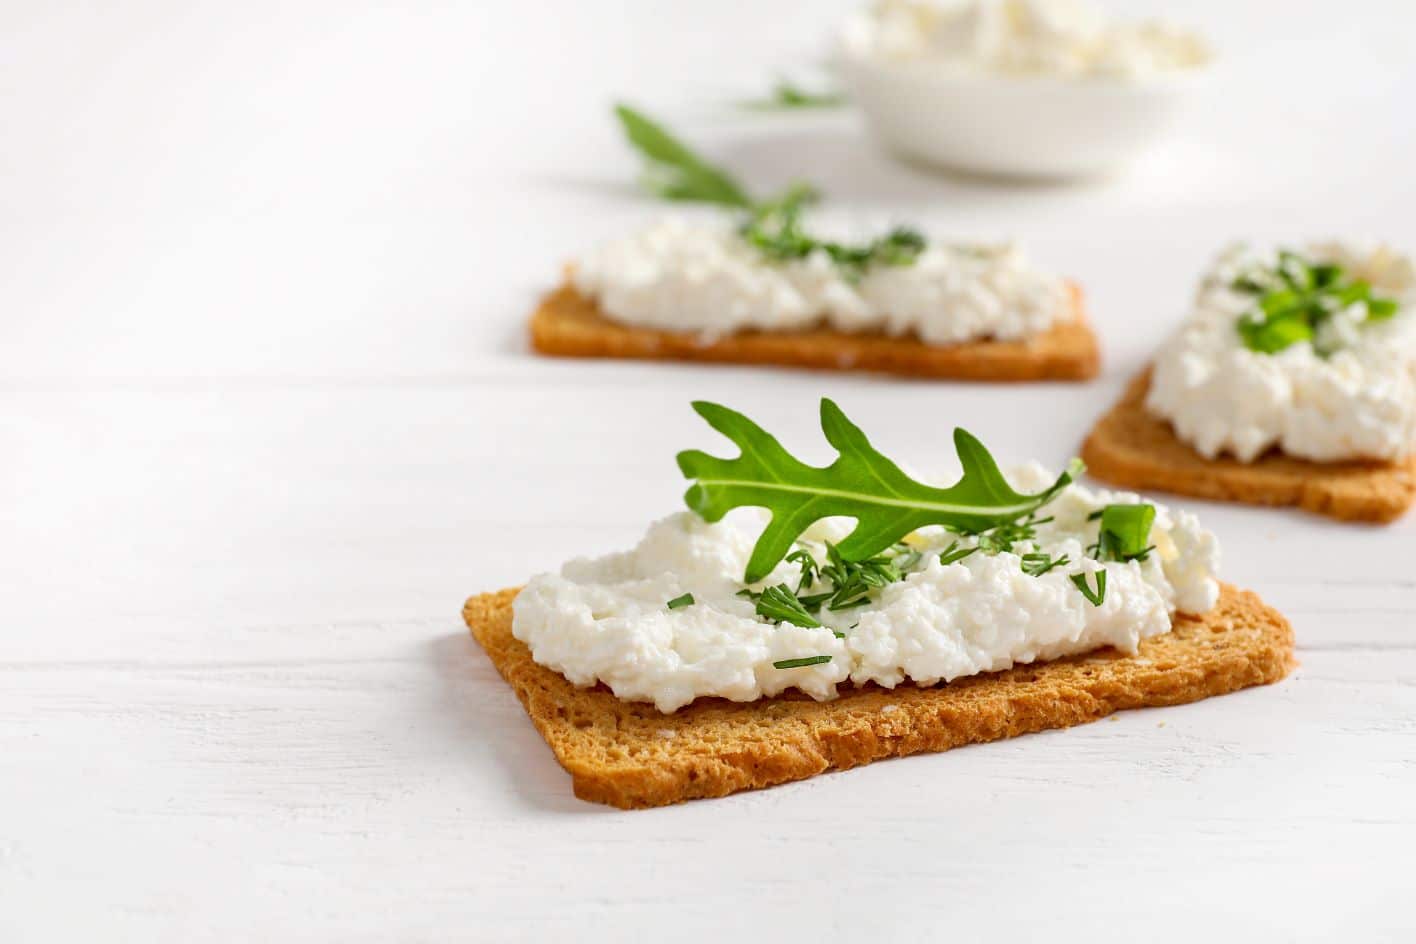 Cottage cheese on whole grain crackers with arugula